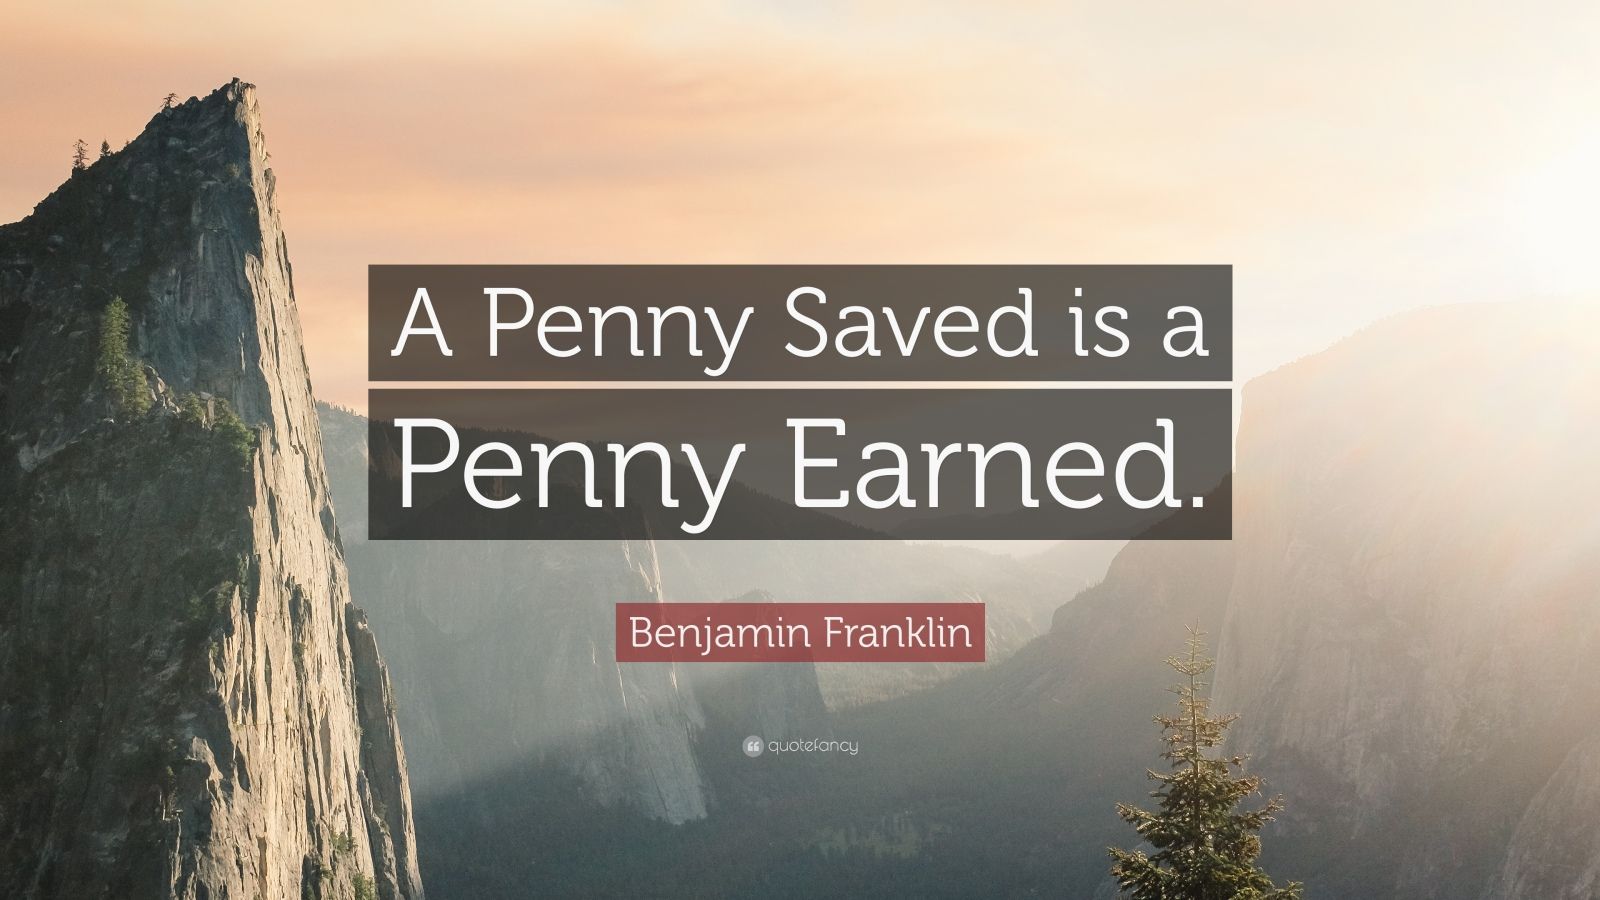 Benjamin Franklin Quote: A Penny Saved is a Penny Earned